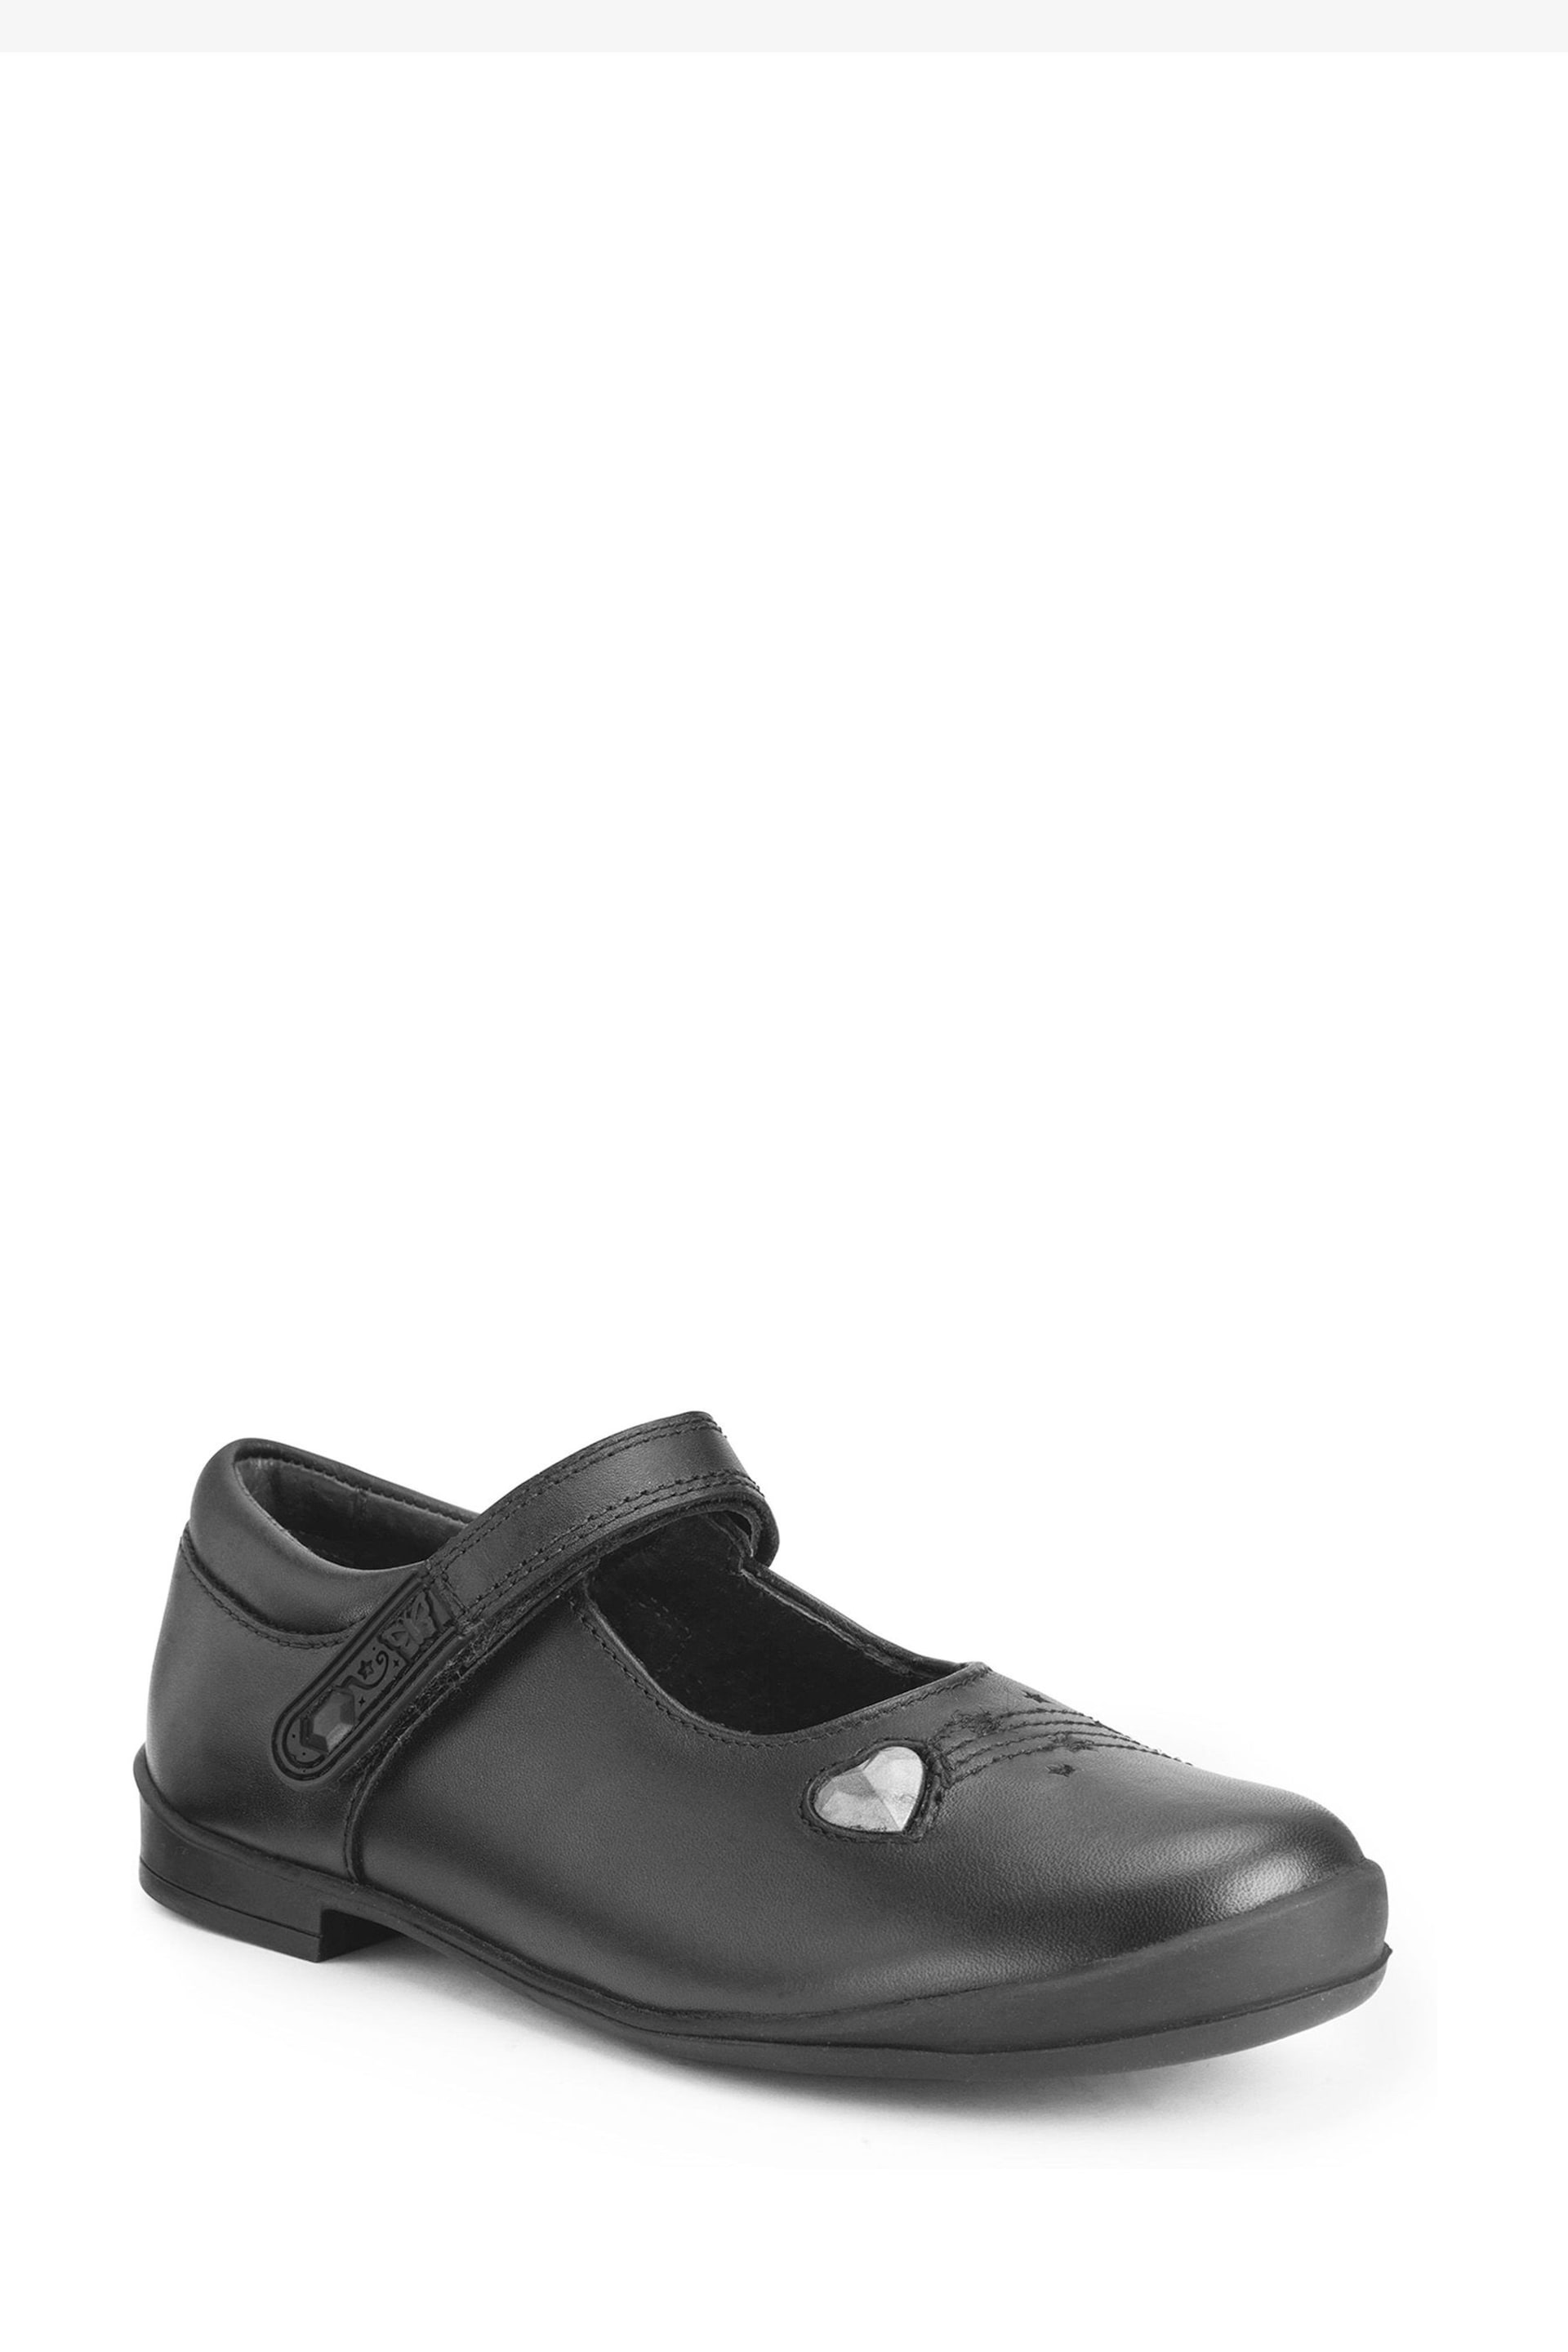 Start-Rite Stardust Black Leather Mary Jane School Shoes - Image 2 of 6